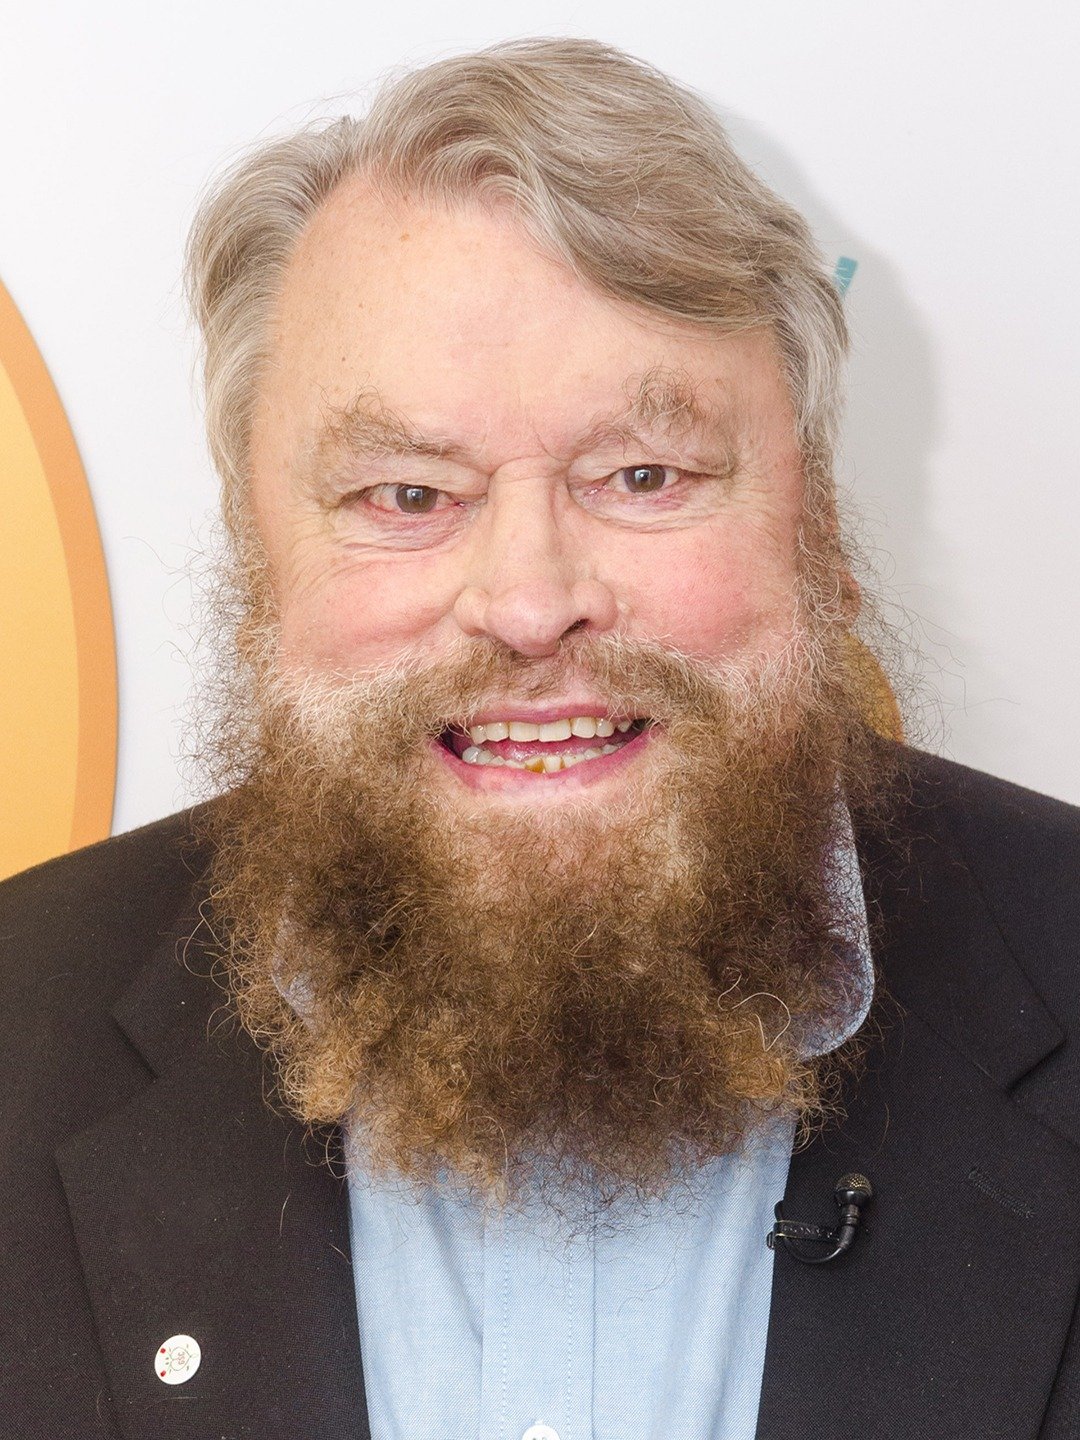 How tall is Brian Blessed?